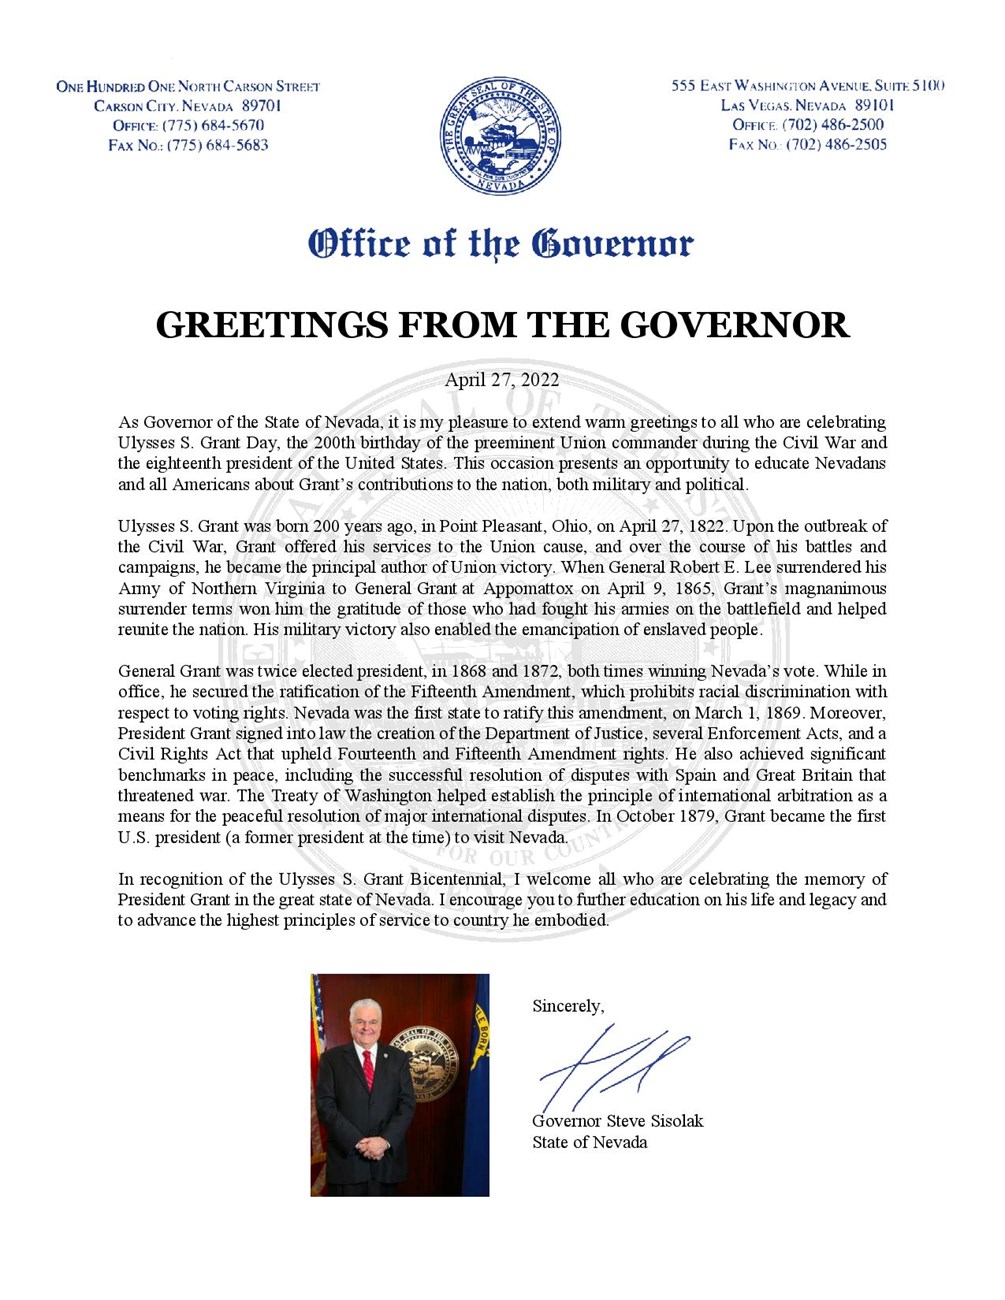 Message on Paper with the state seal of Nevada on top and an image of the governor centered on the bottom